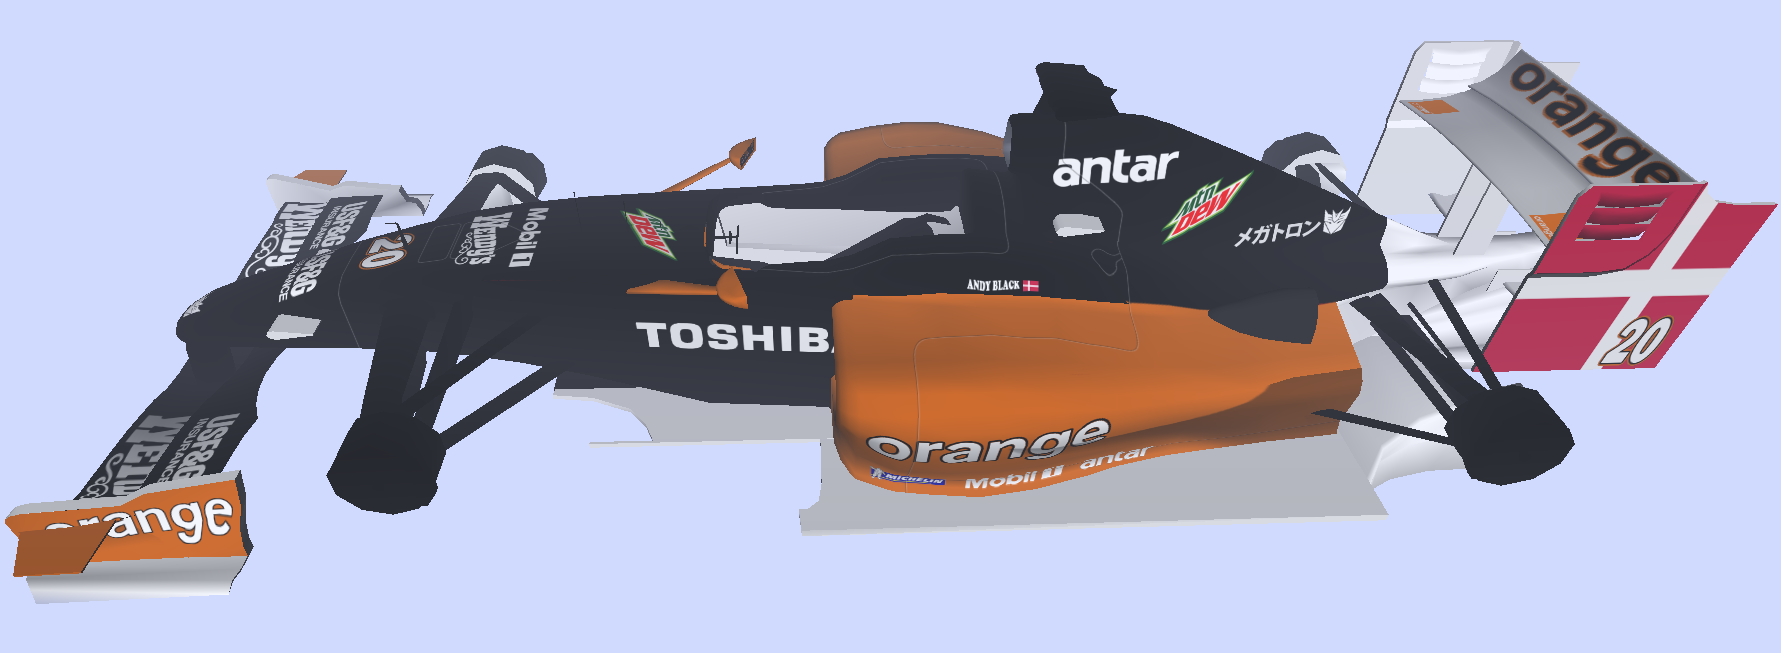 FFG Viper Racing Japan LIvery.PNG